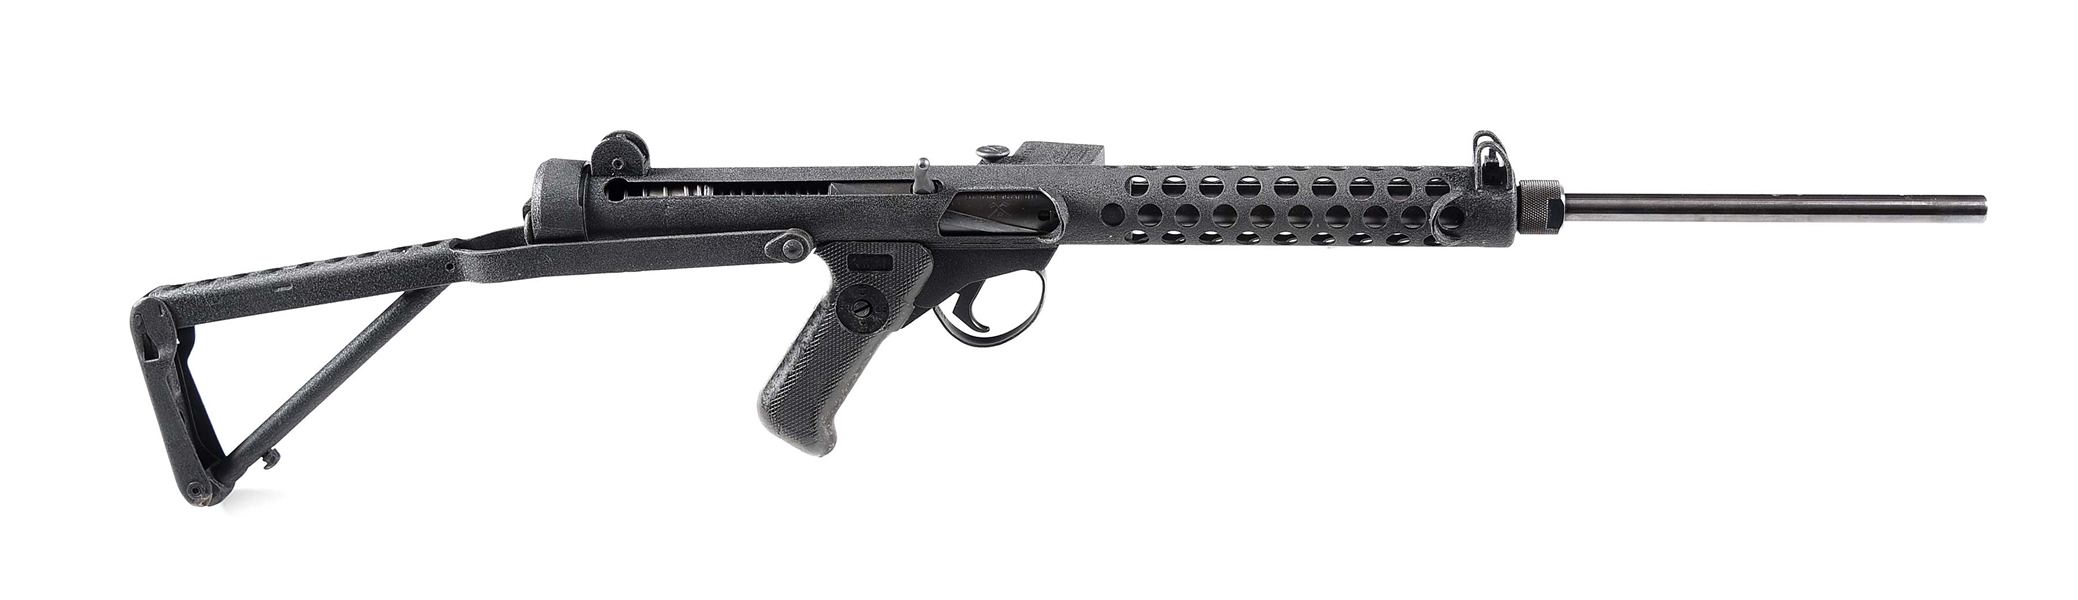 (M) WISE LITE ARMS STERLING SPORTER SEMI-AUTOMATIC RIFLE.